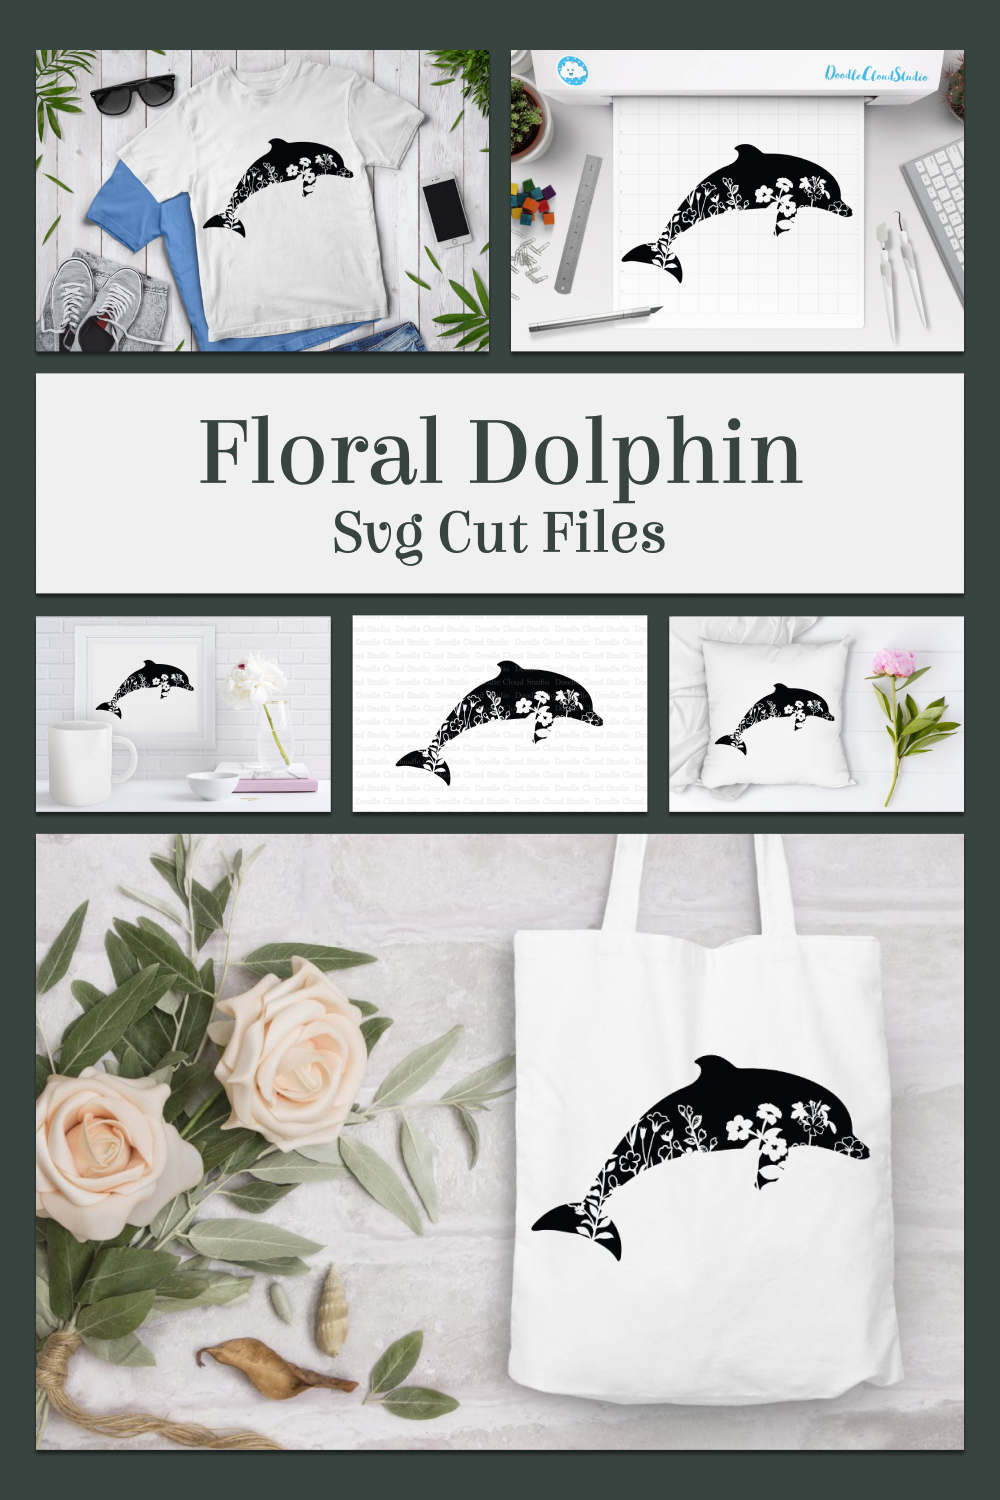 White bag with a dolphin on it.